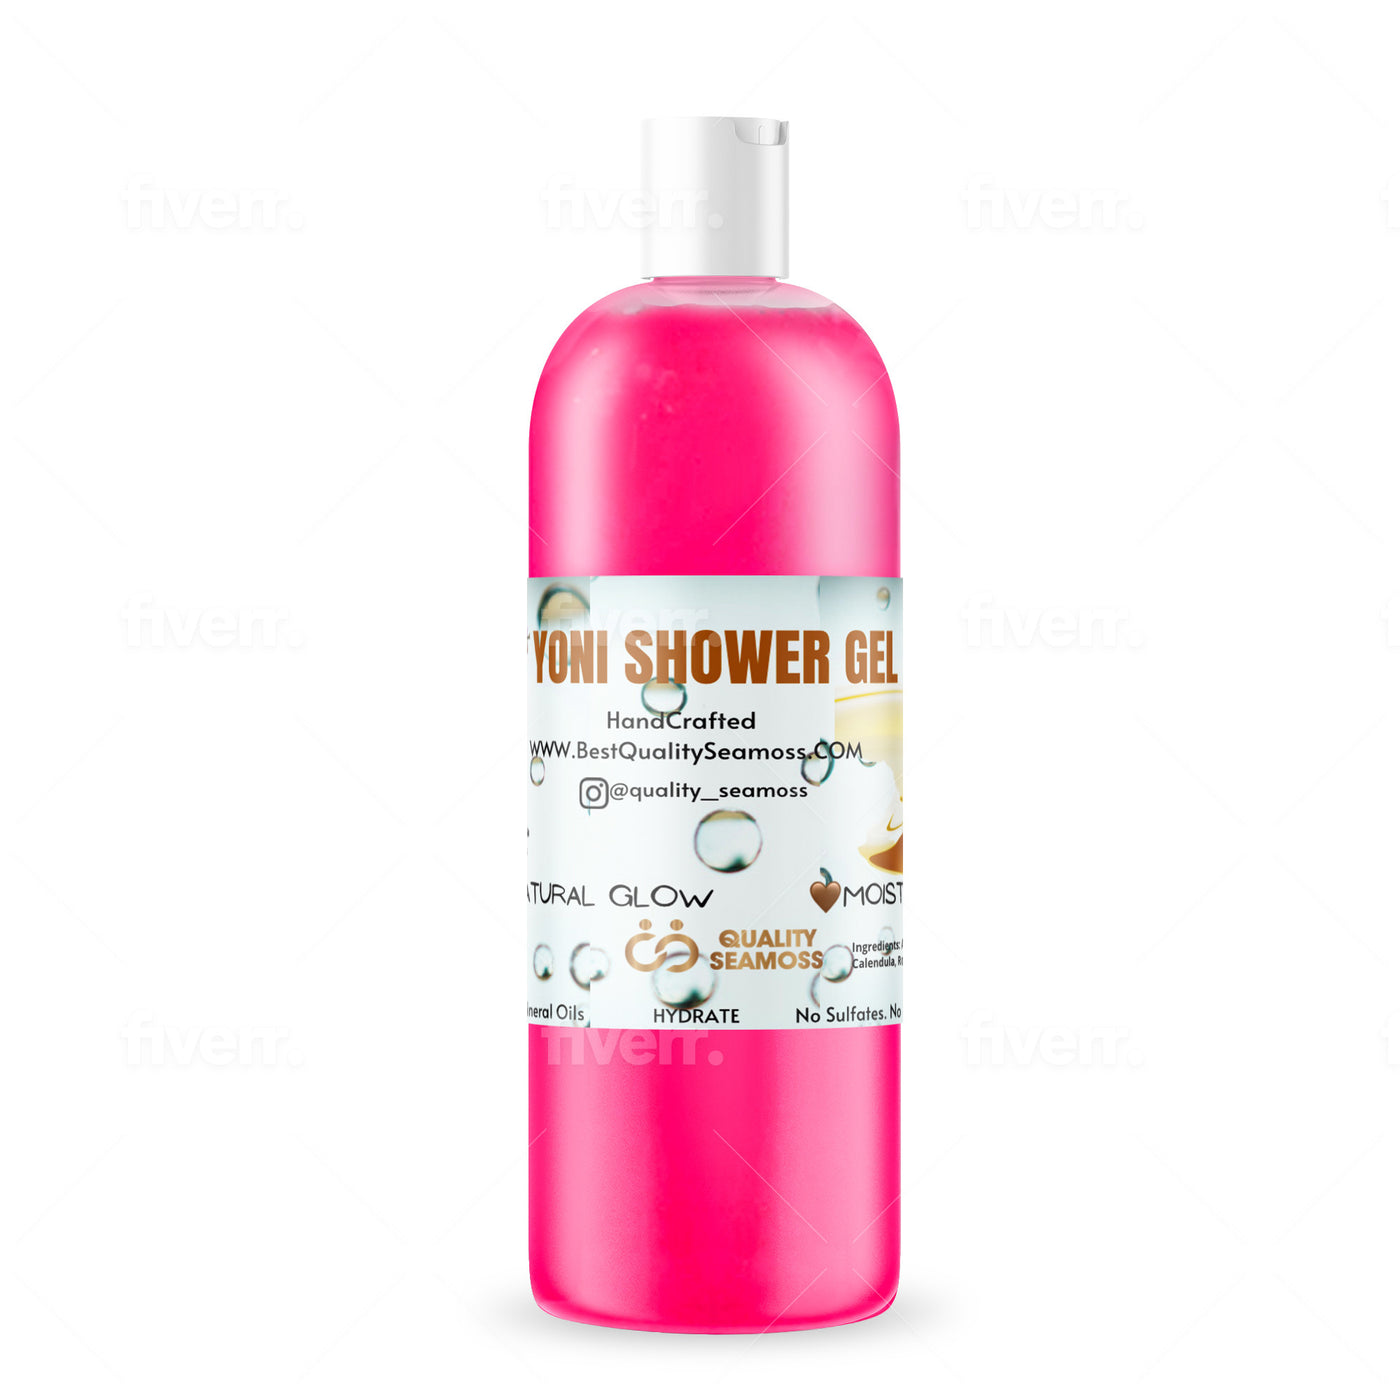 Yoni Shower Gel and Body Wash